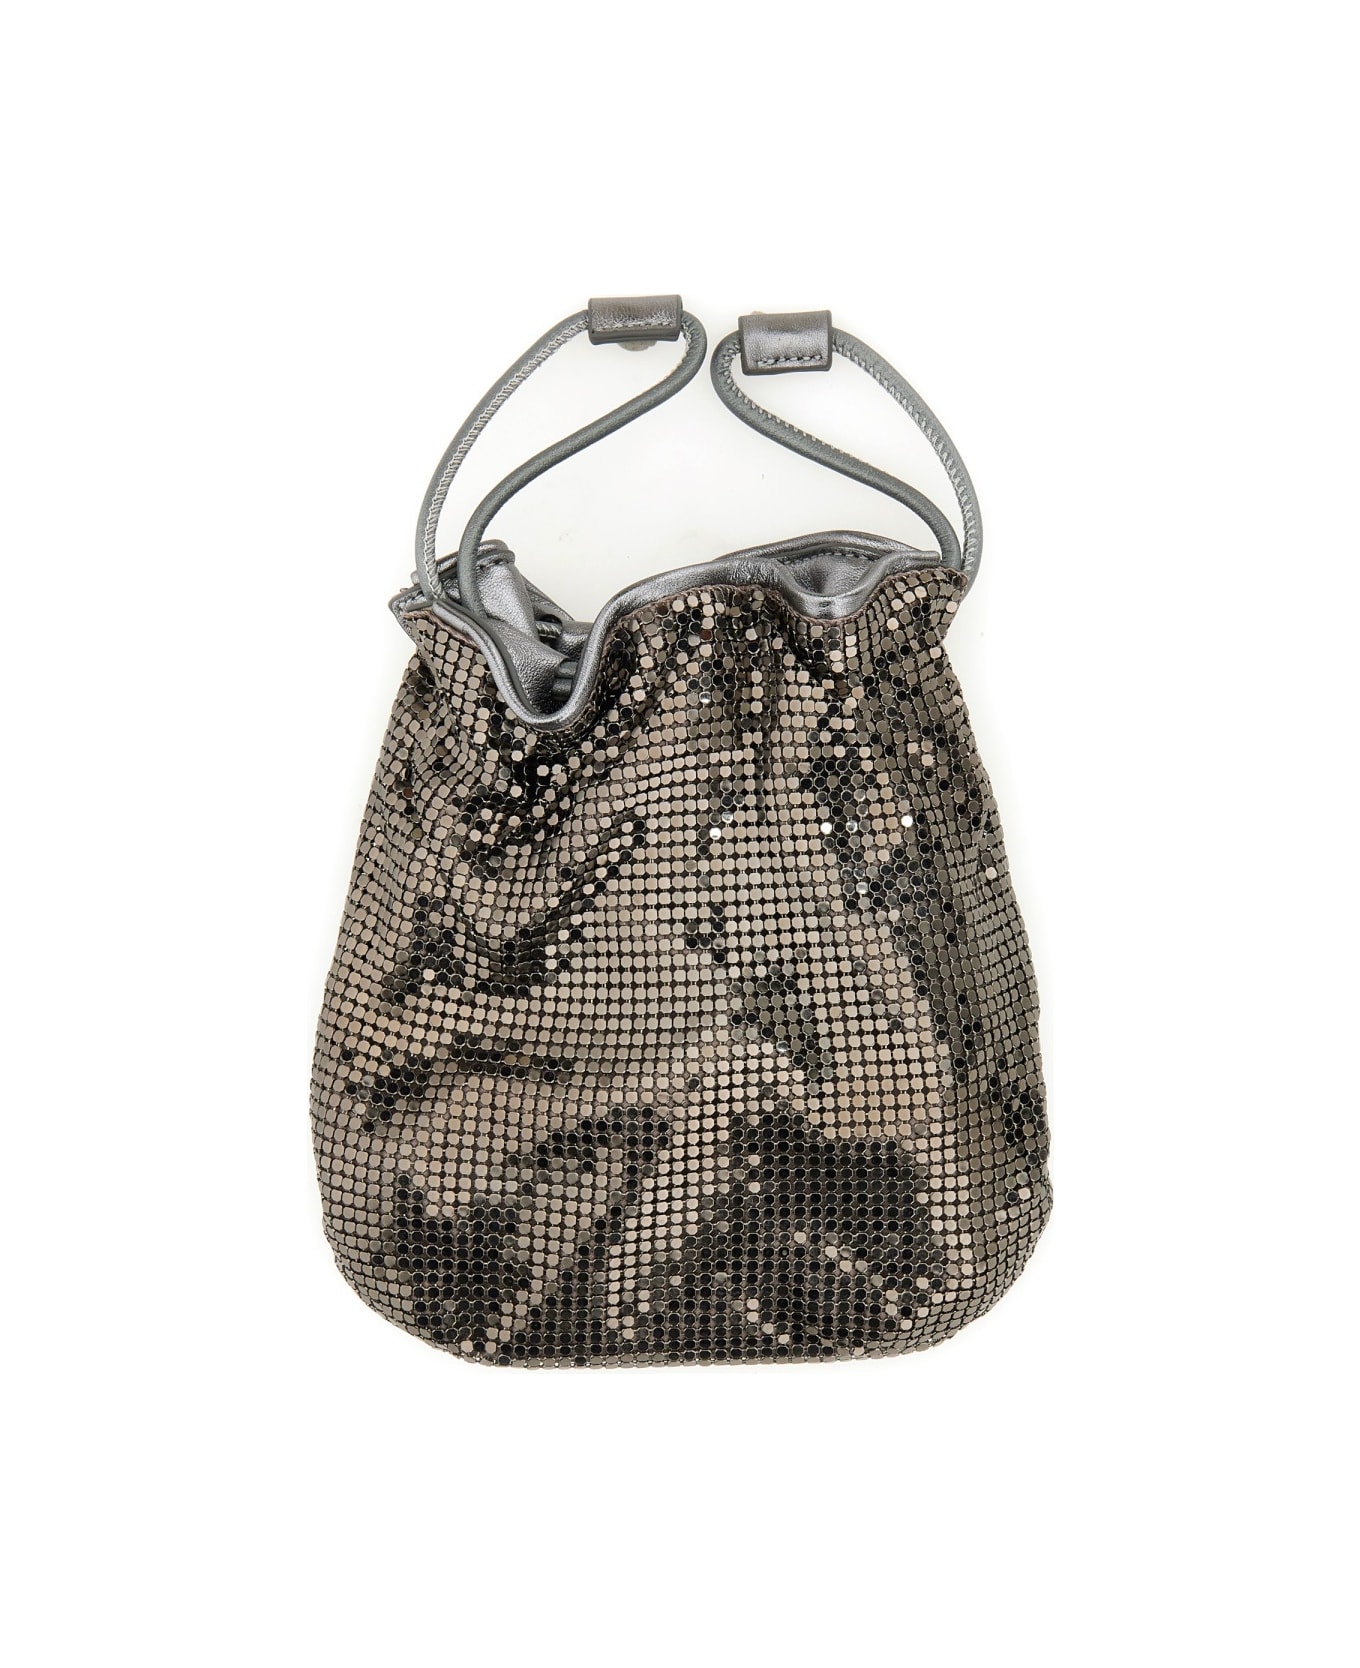 Anya Hindmarch Pouch In Mesh - CHARCOAL